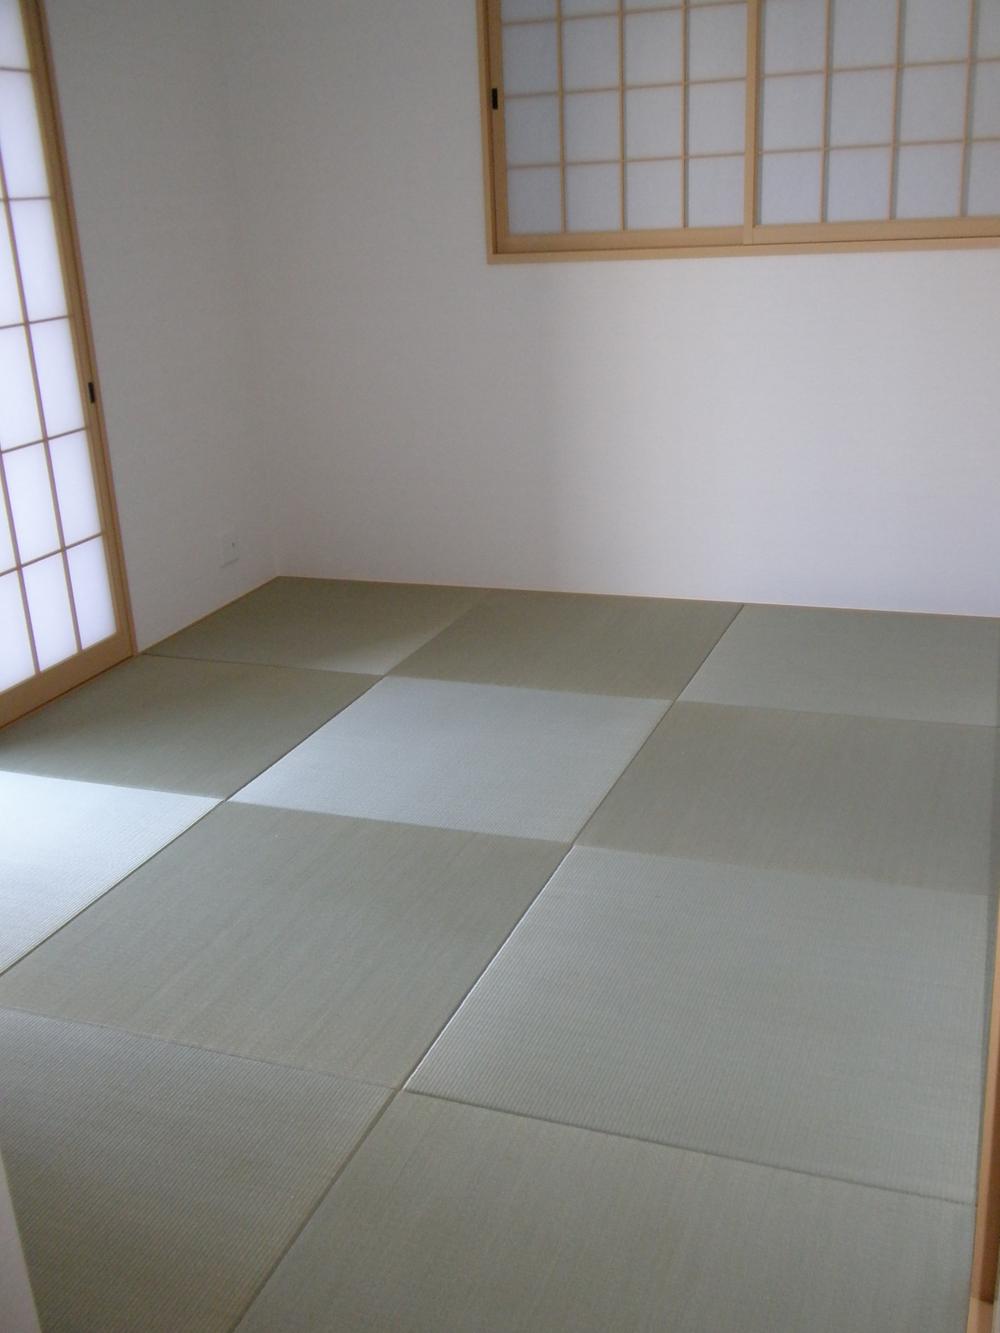 Same specifications photos (Other introspection). The first floor is Japanese-style room